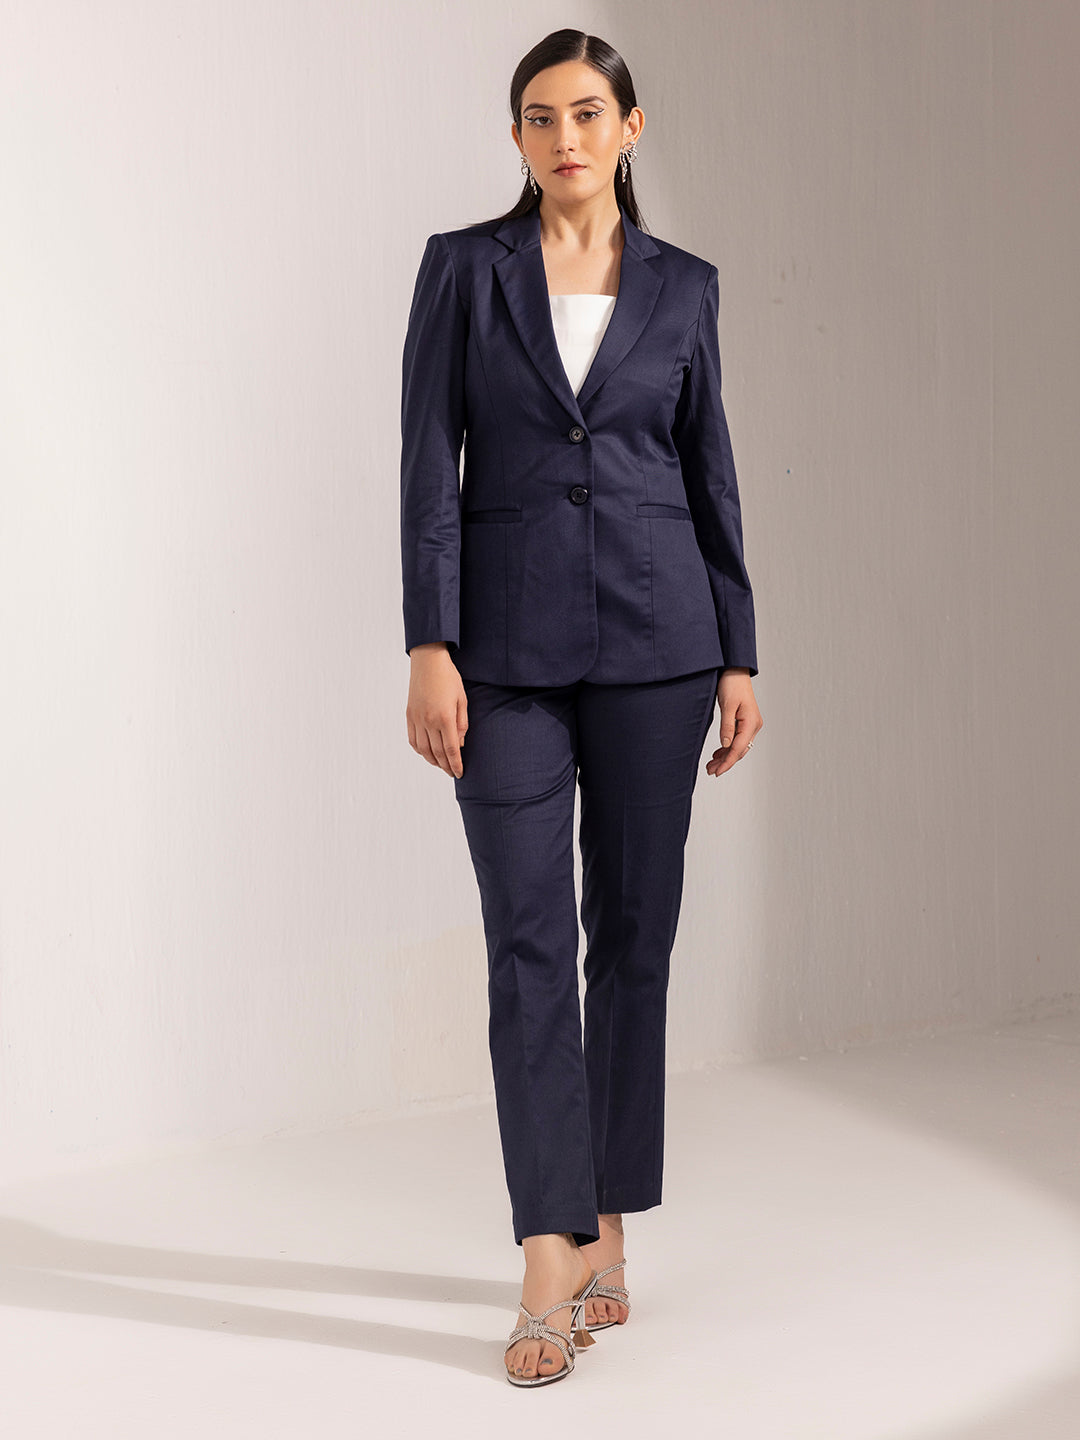 Buy Business Suits For Women, Work Wear Clothing